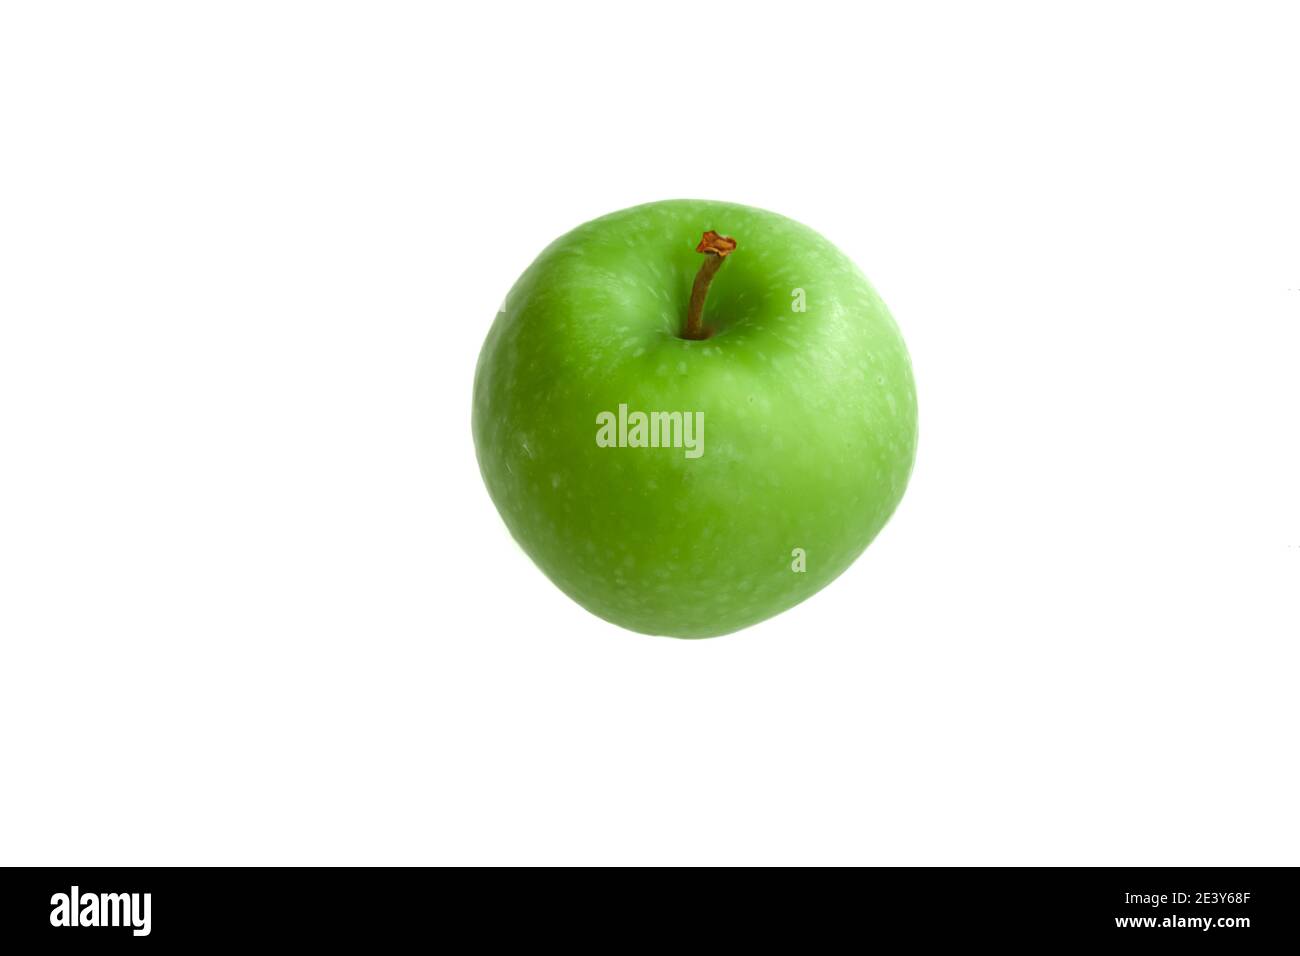 Fresh green apple isolated on white background with space for text. Healthy foods or snack. Stock Photo